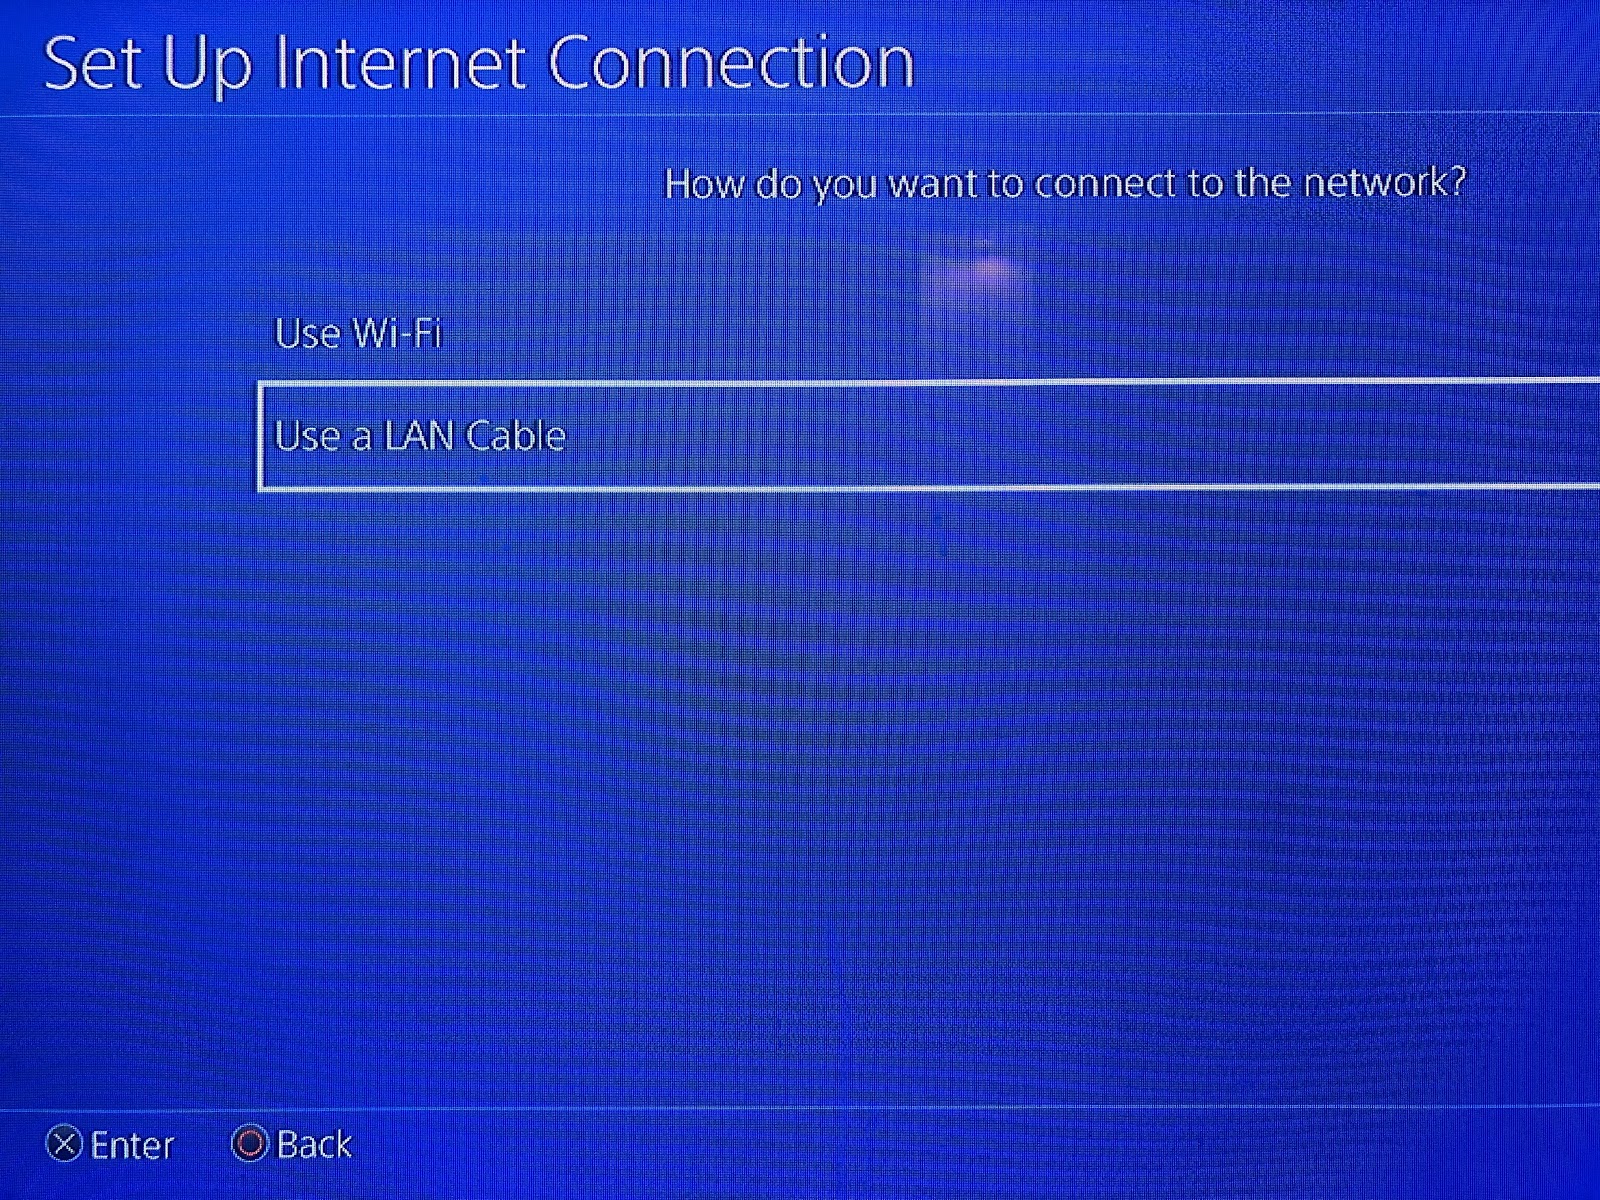 ps4 network settings for faster internet